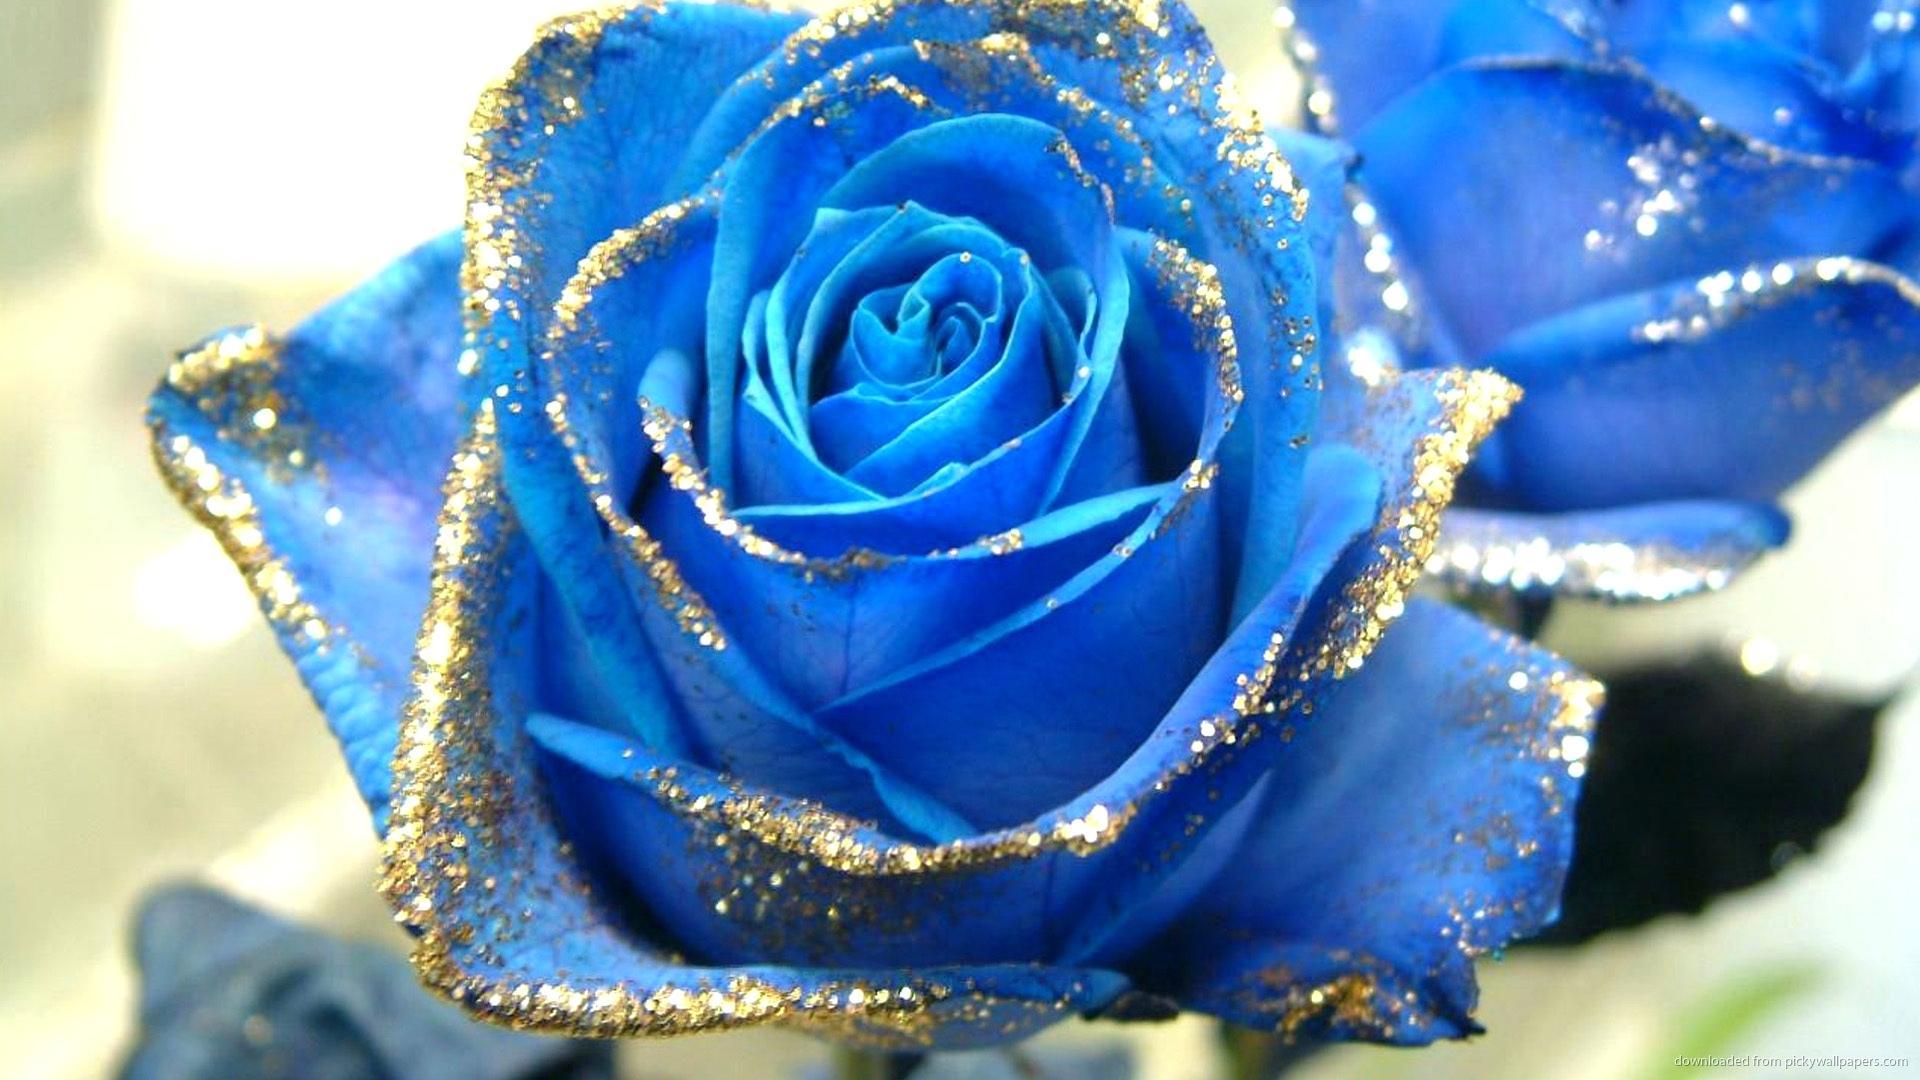 Gold And Blue Wallpaper Rose With Glitter Picture For Wallpaper